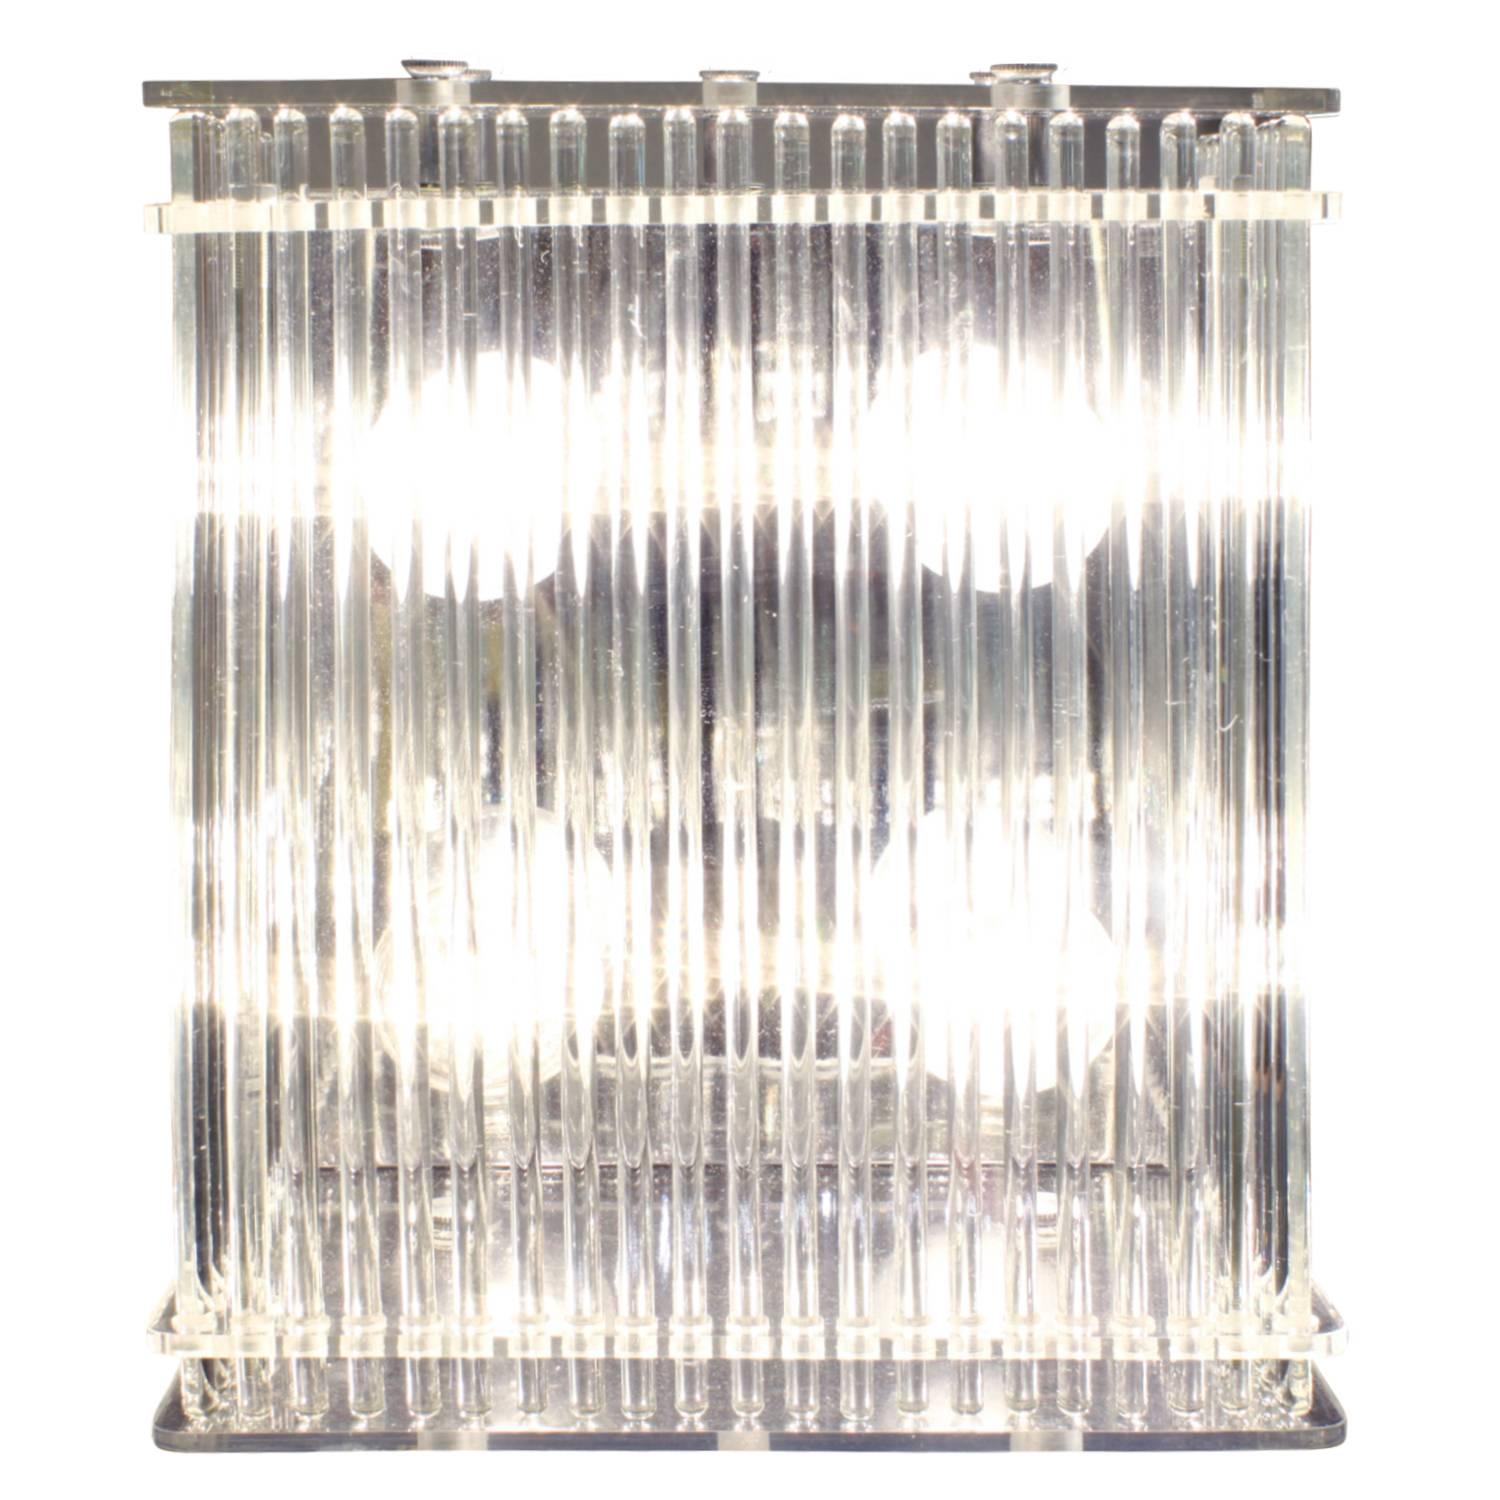 Flush mount ceiling fixture or wall sconce in Lucite with glass rods all around by Lightolier, American, 1970s. The light diffuses through the glass rods beautifully.